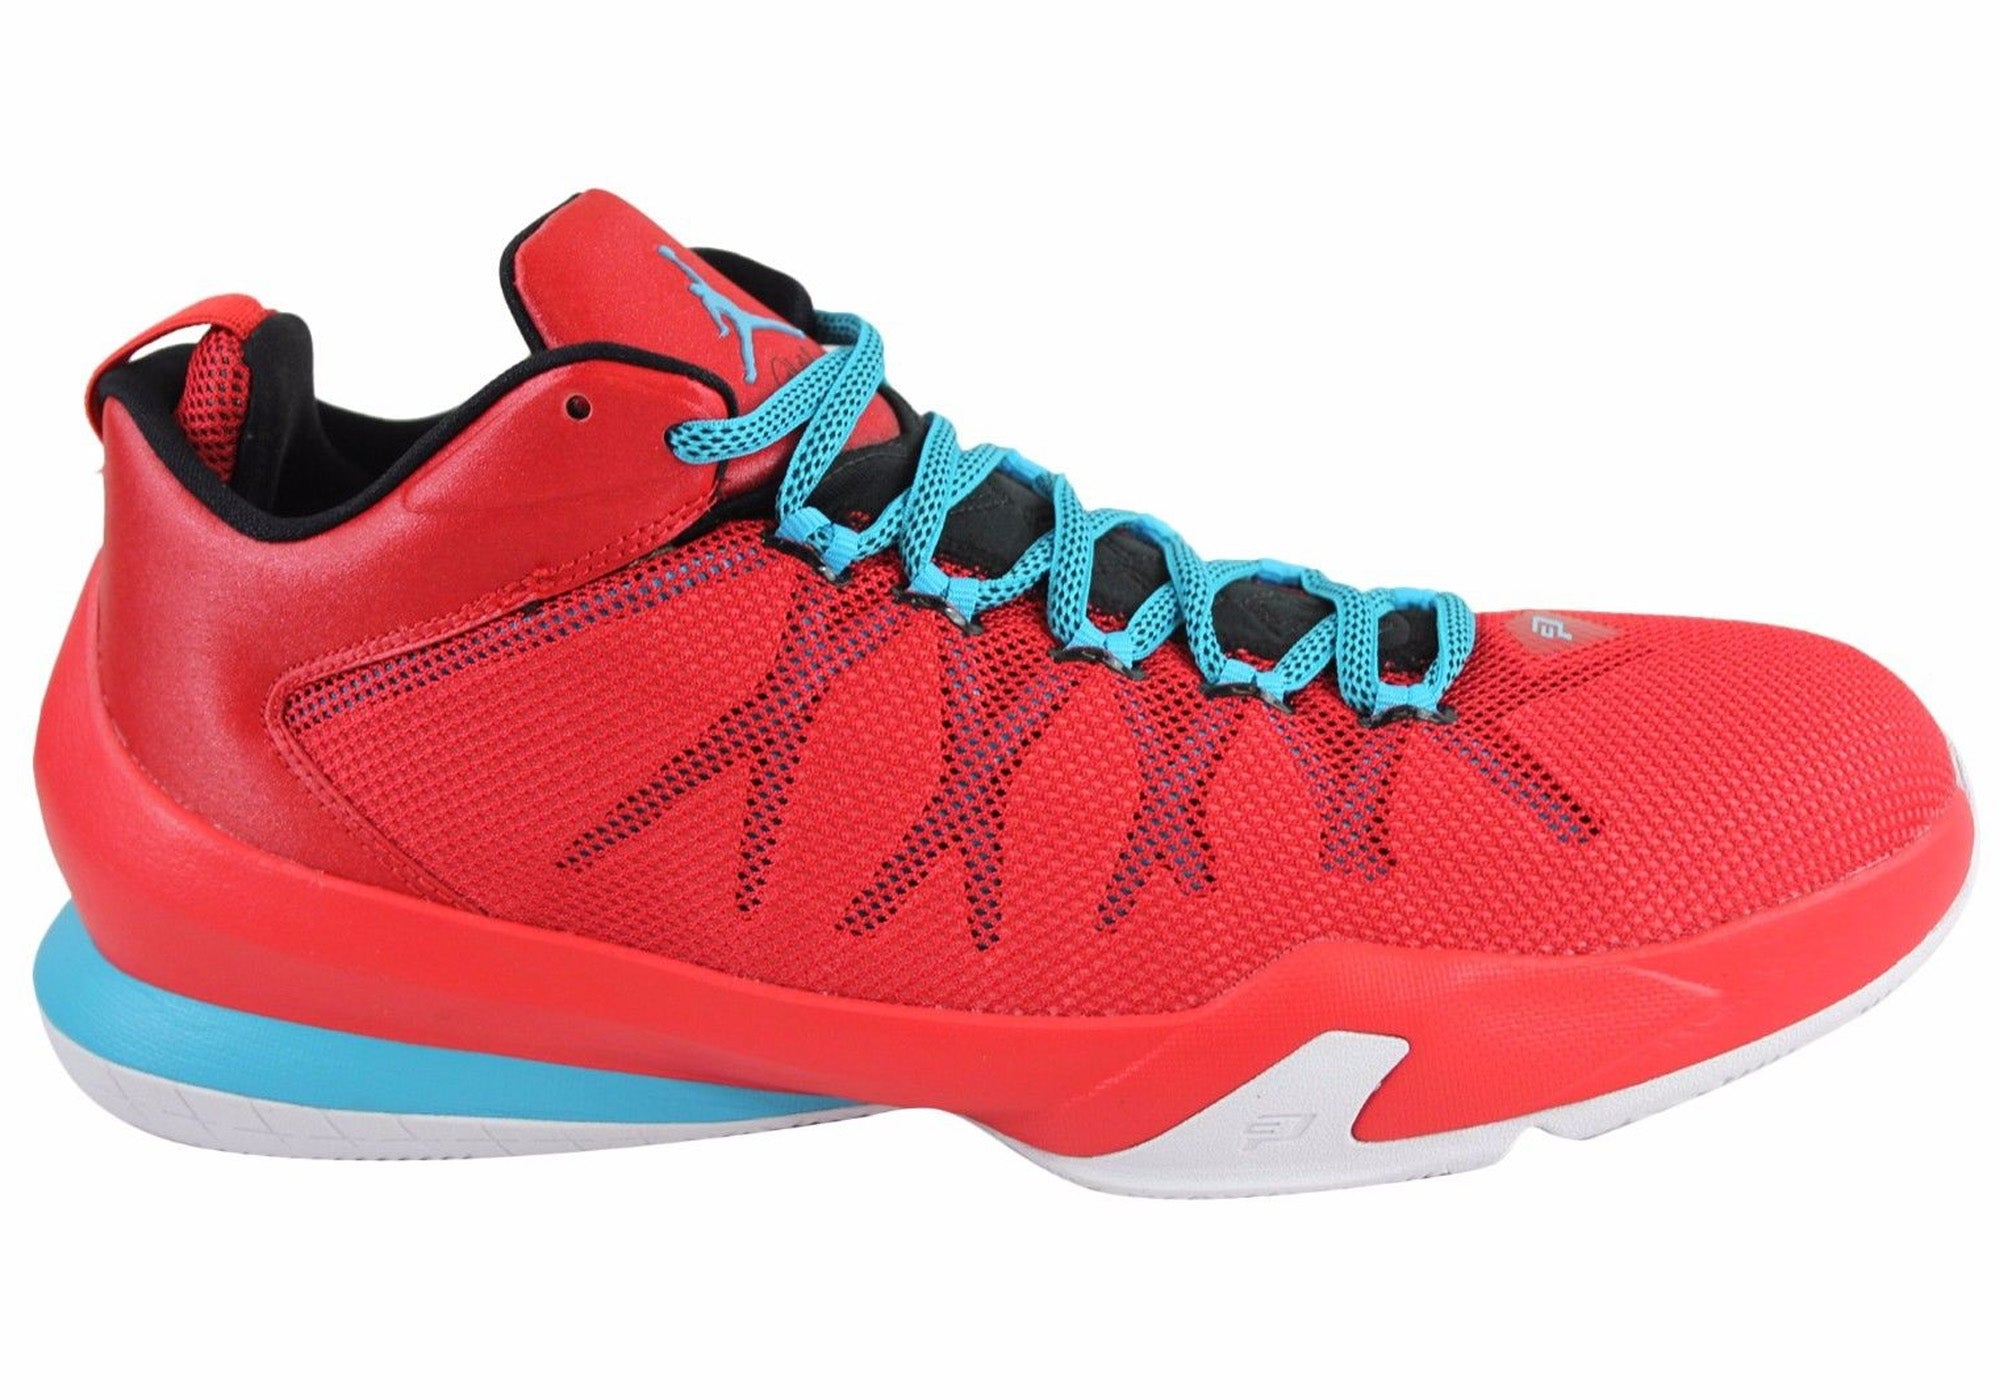 cp3 basketball shoes